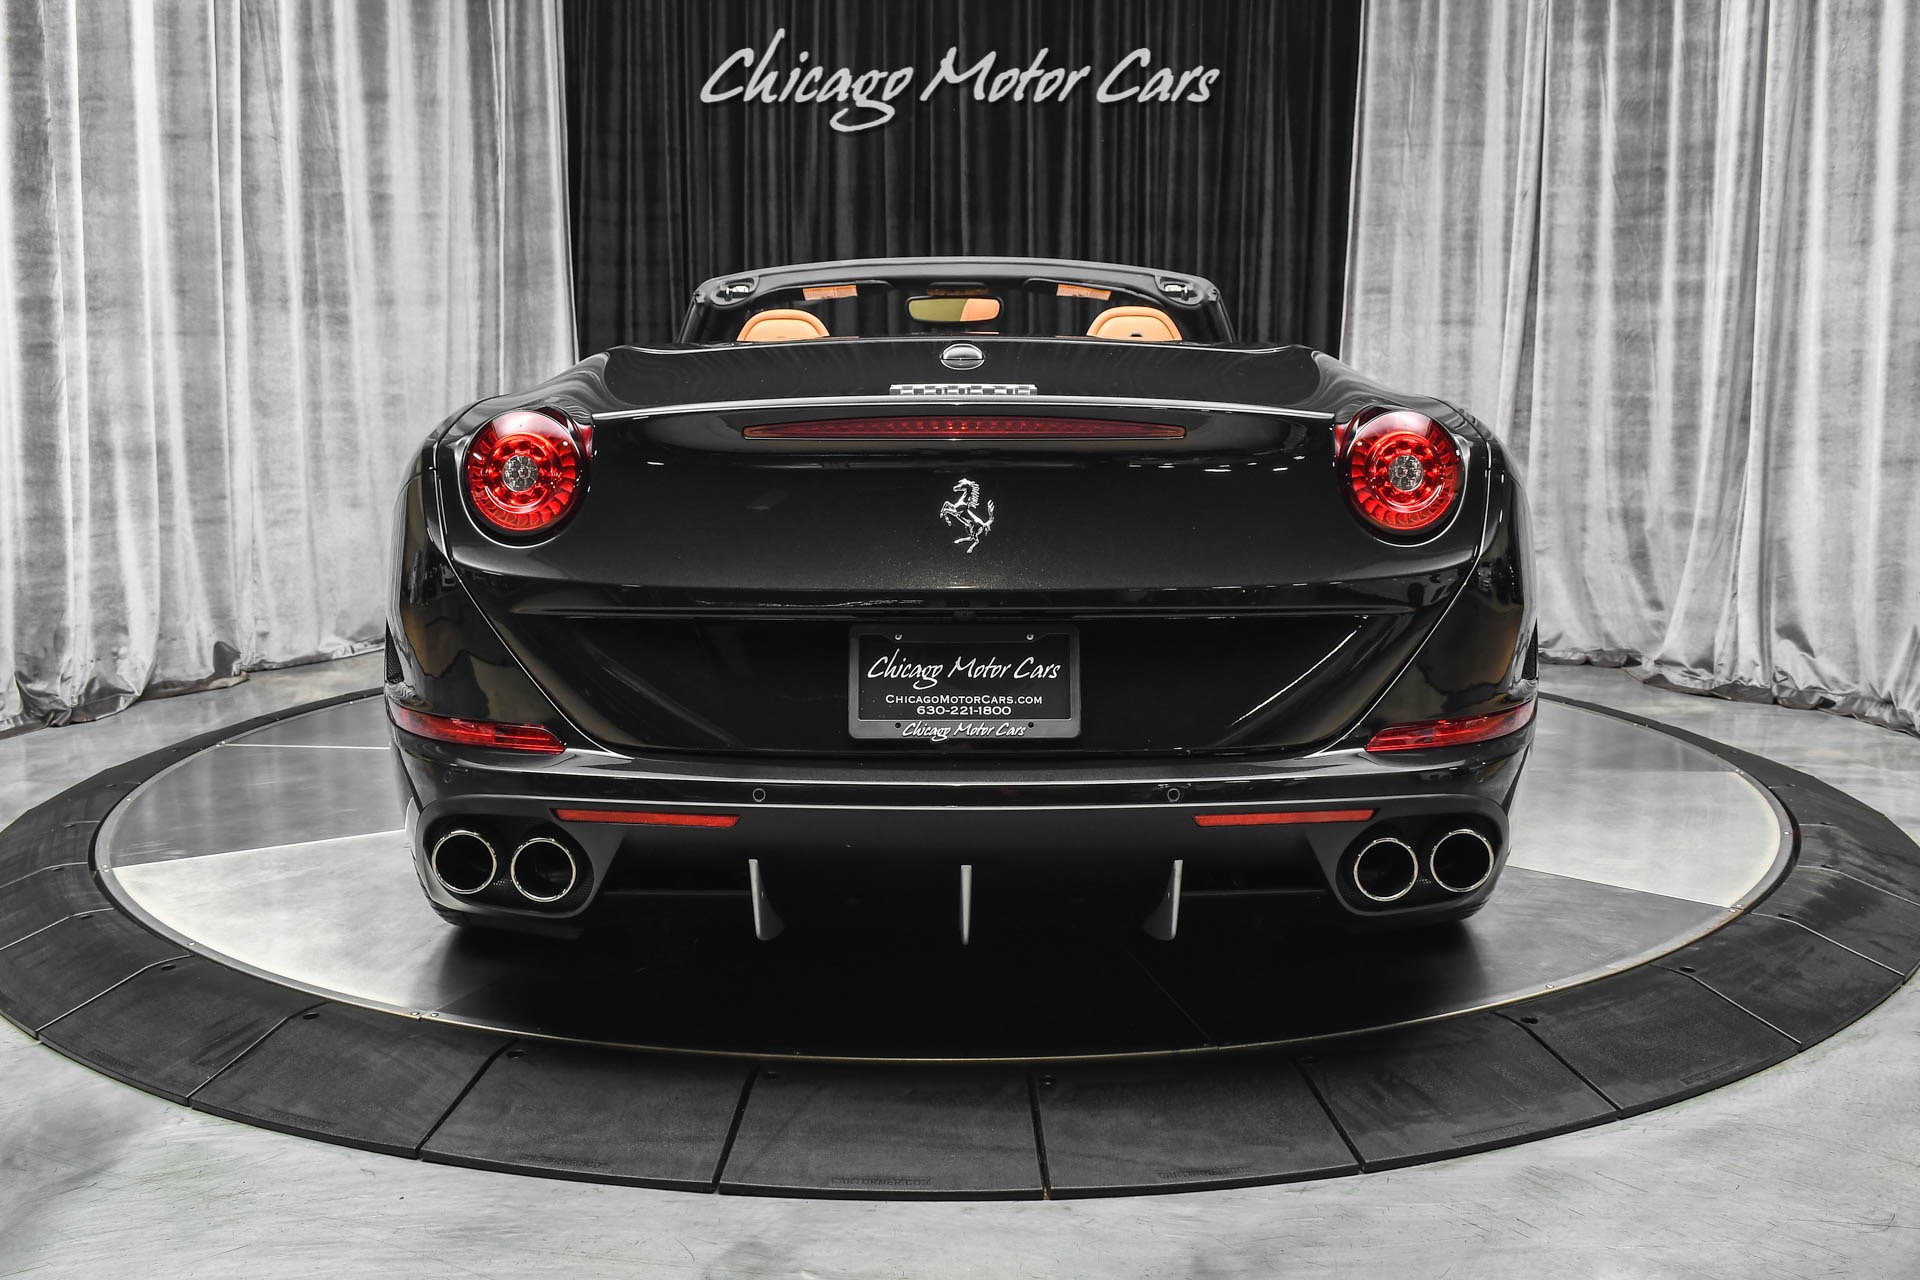 Used-2015-Ferrari-California-T-Convertible-20s-Only-13k-Miles-SERVICED-Optioned-Well-Hot-Color-Combo